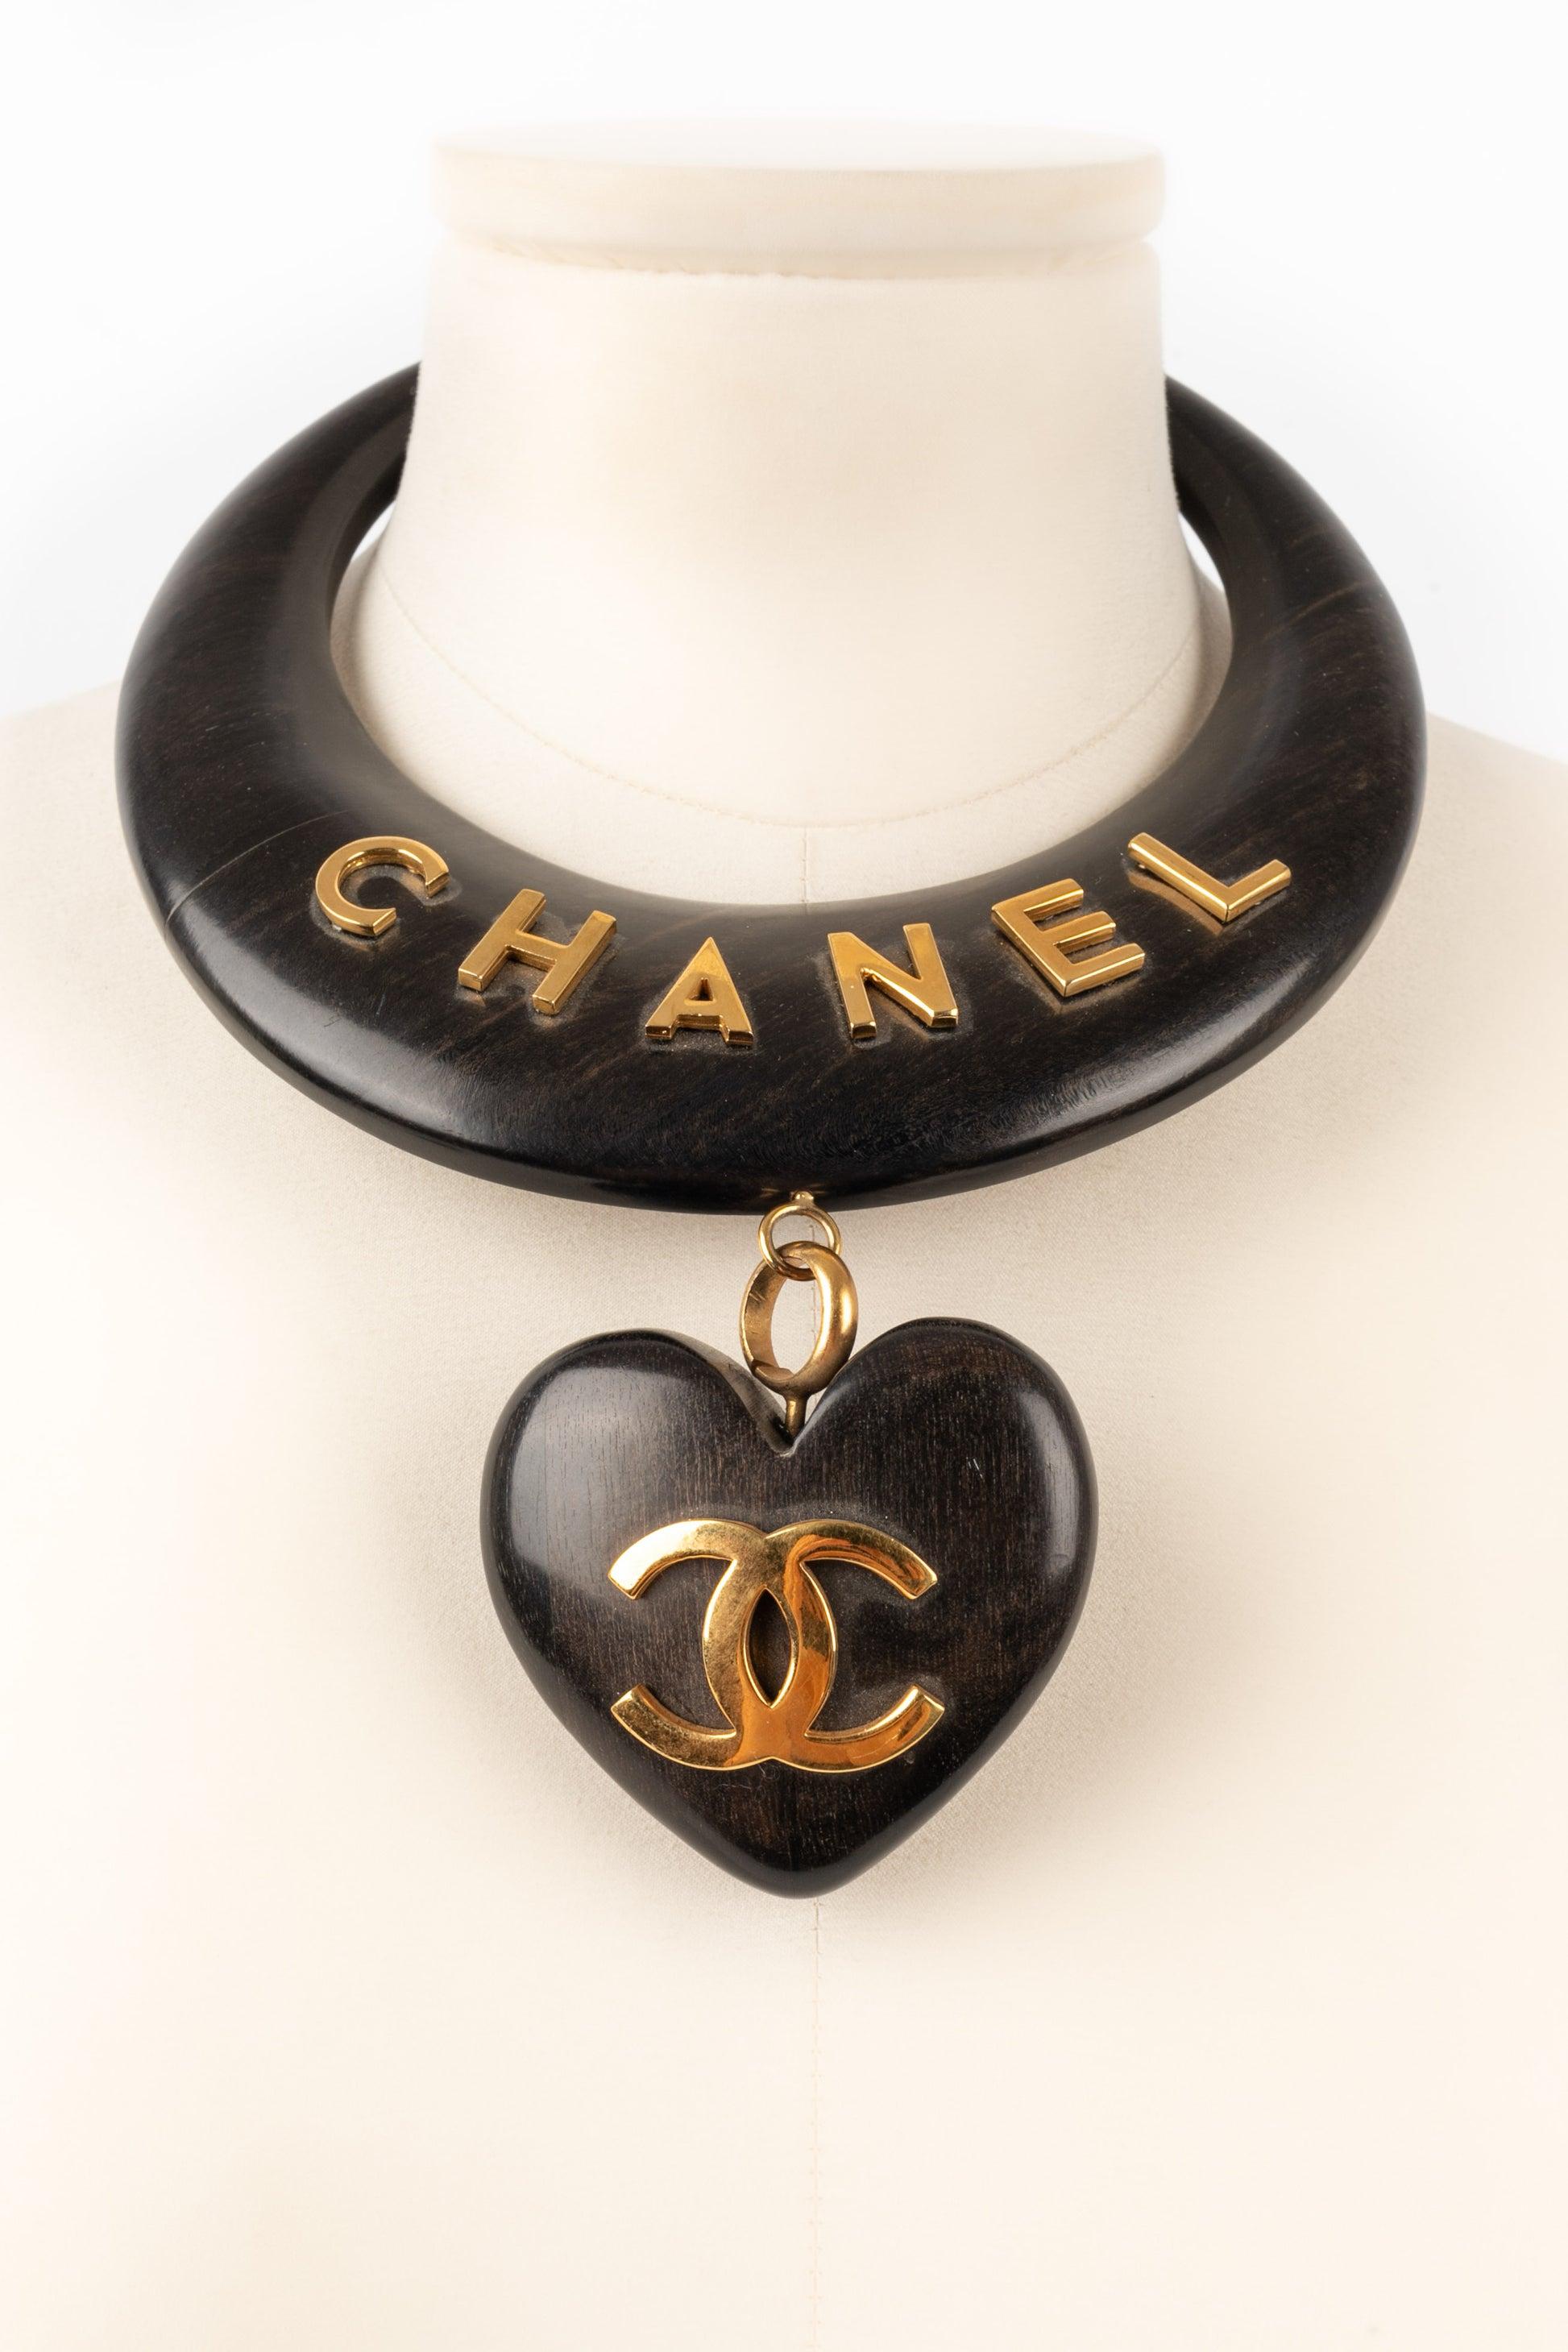 Chanel Golden Metal and Wood Short Necklace For Sale 4